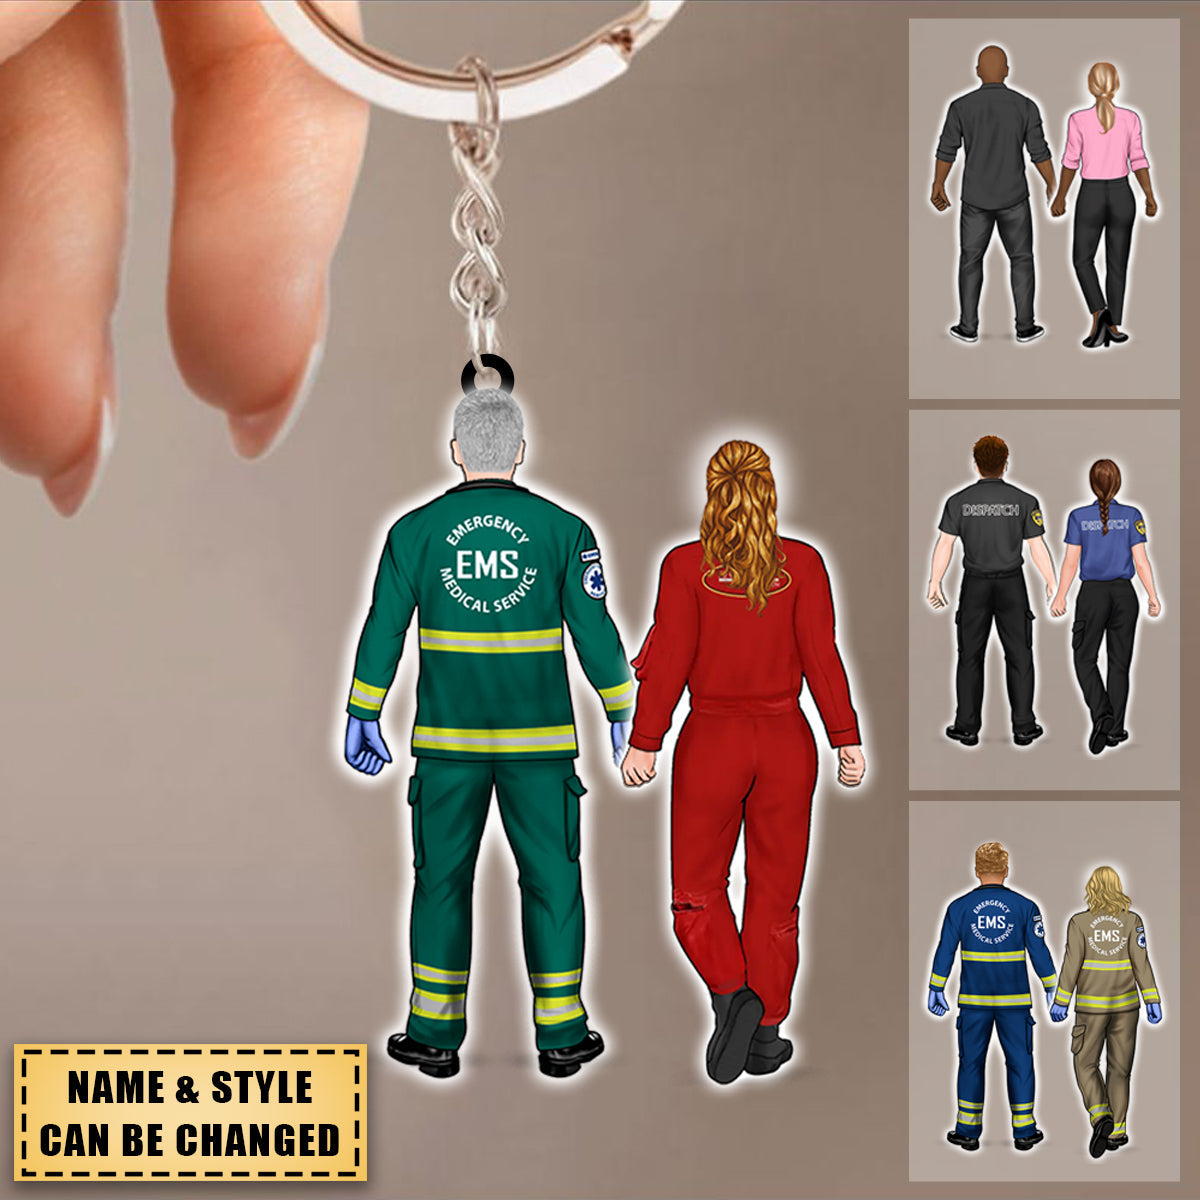 Couple Friends - Personalized Keychain Firefighter, EMS, Police Officer, Military, Nurse